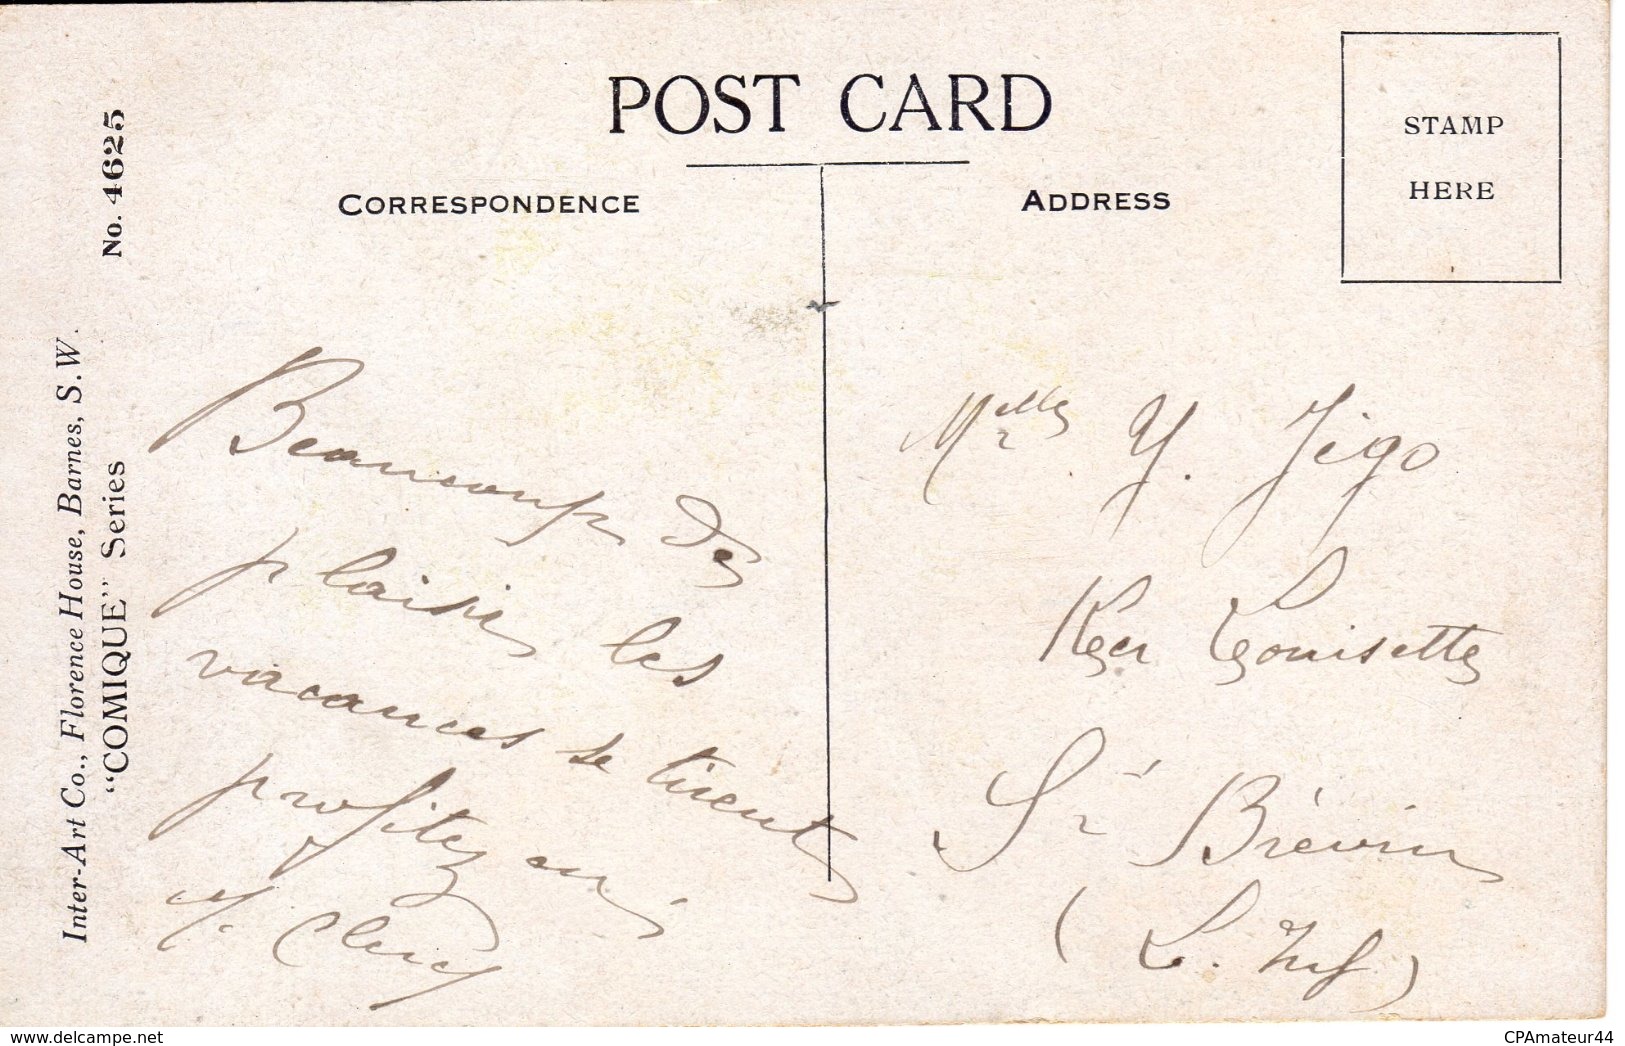 Florence House, Barnes, S.W "COMIQUE" Series 4625  Chats - 1900-1949